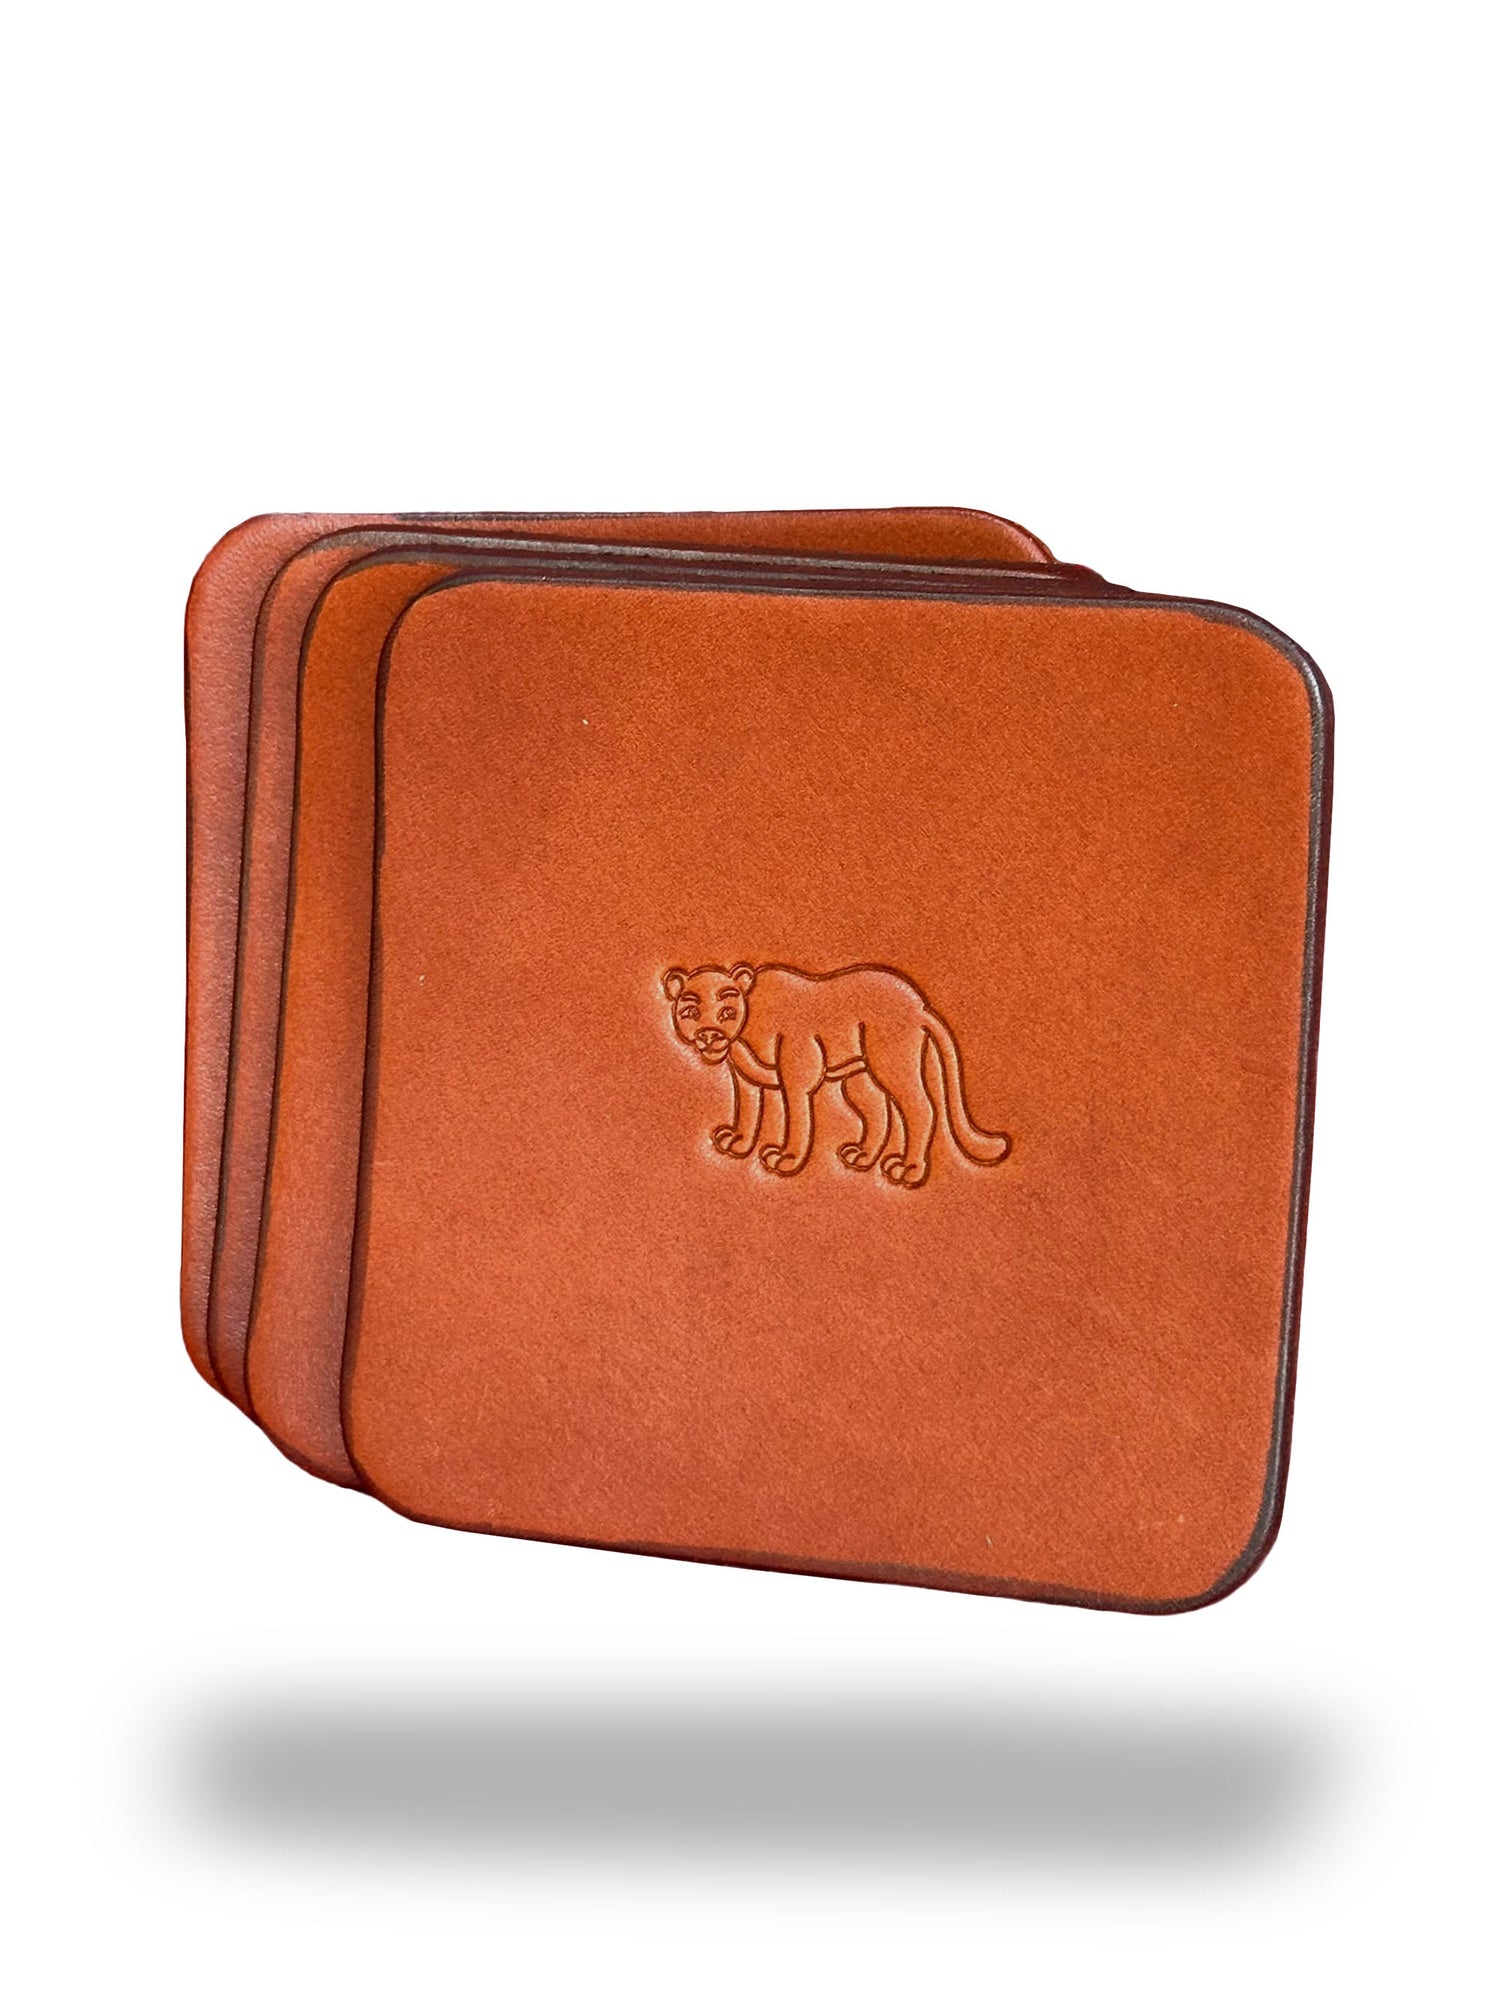 Square Leather Coasters with Lion Design - Set of 4